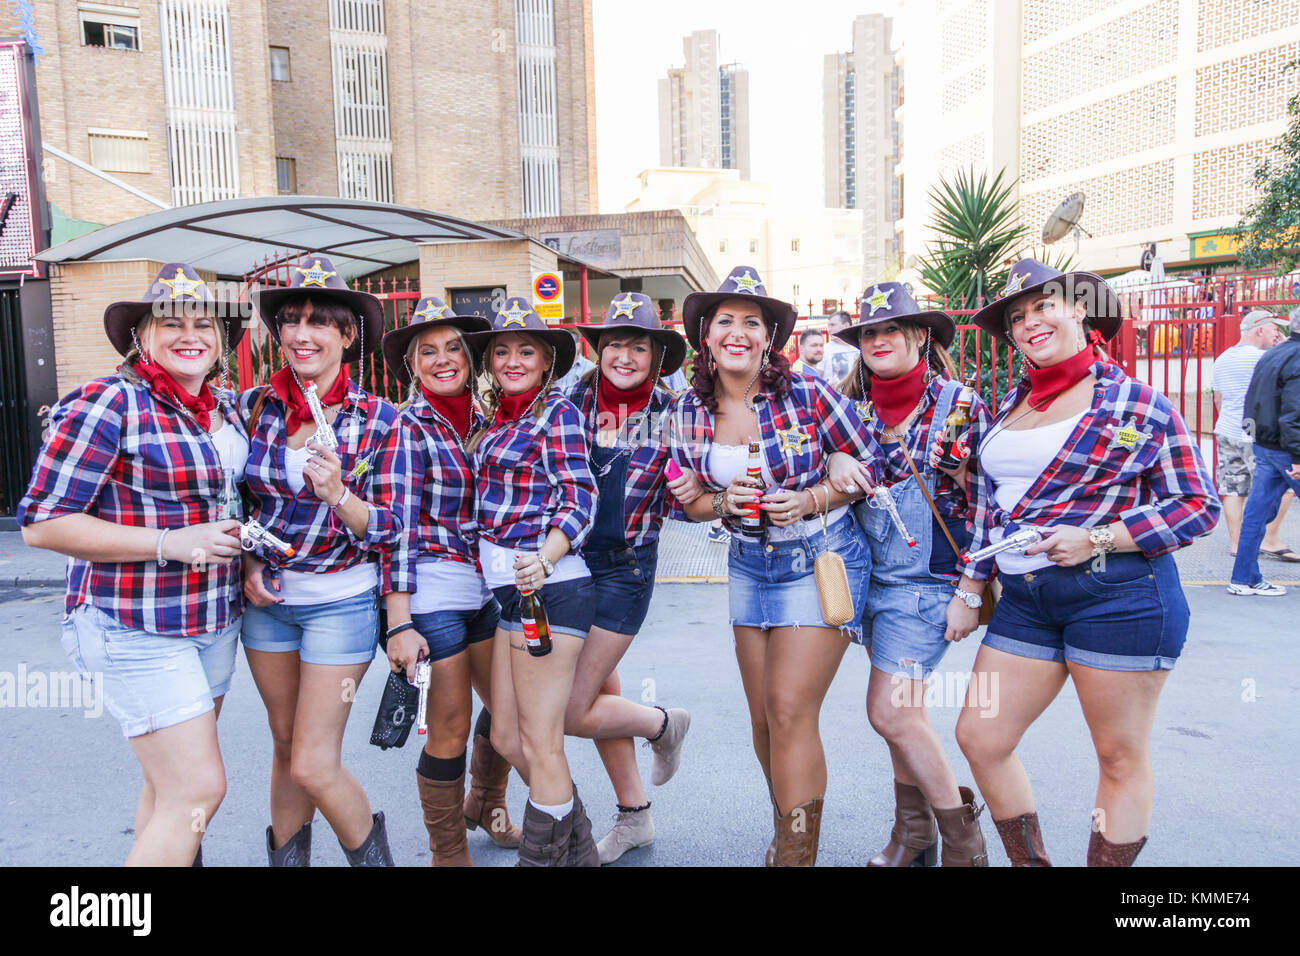 Benidorm new town British fancy dress day group of women dressed as cowgirls in shorts Stock Photo